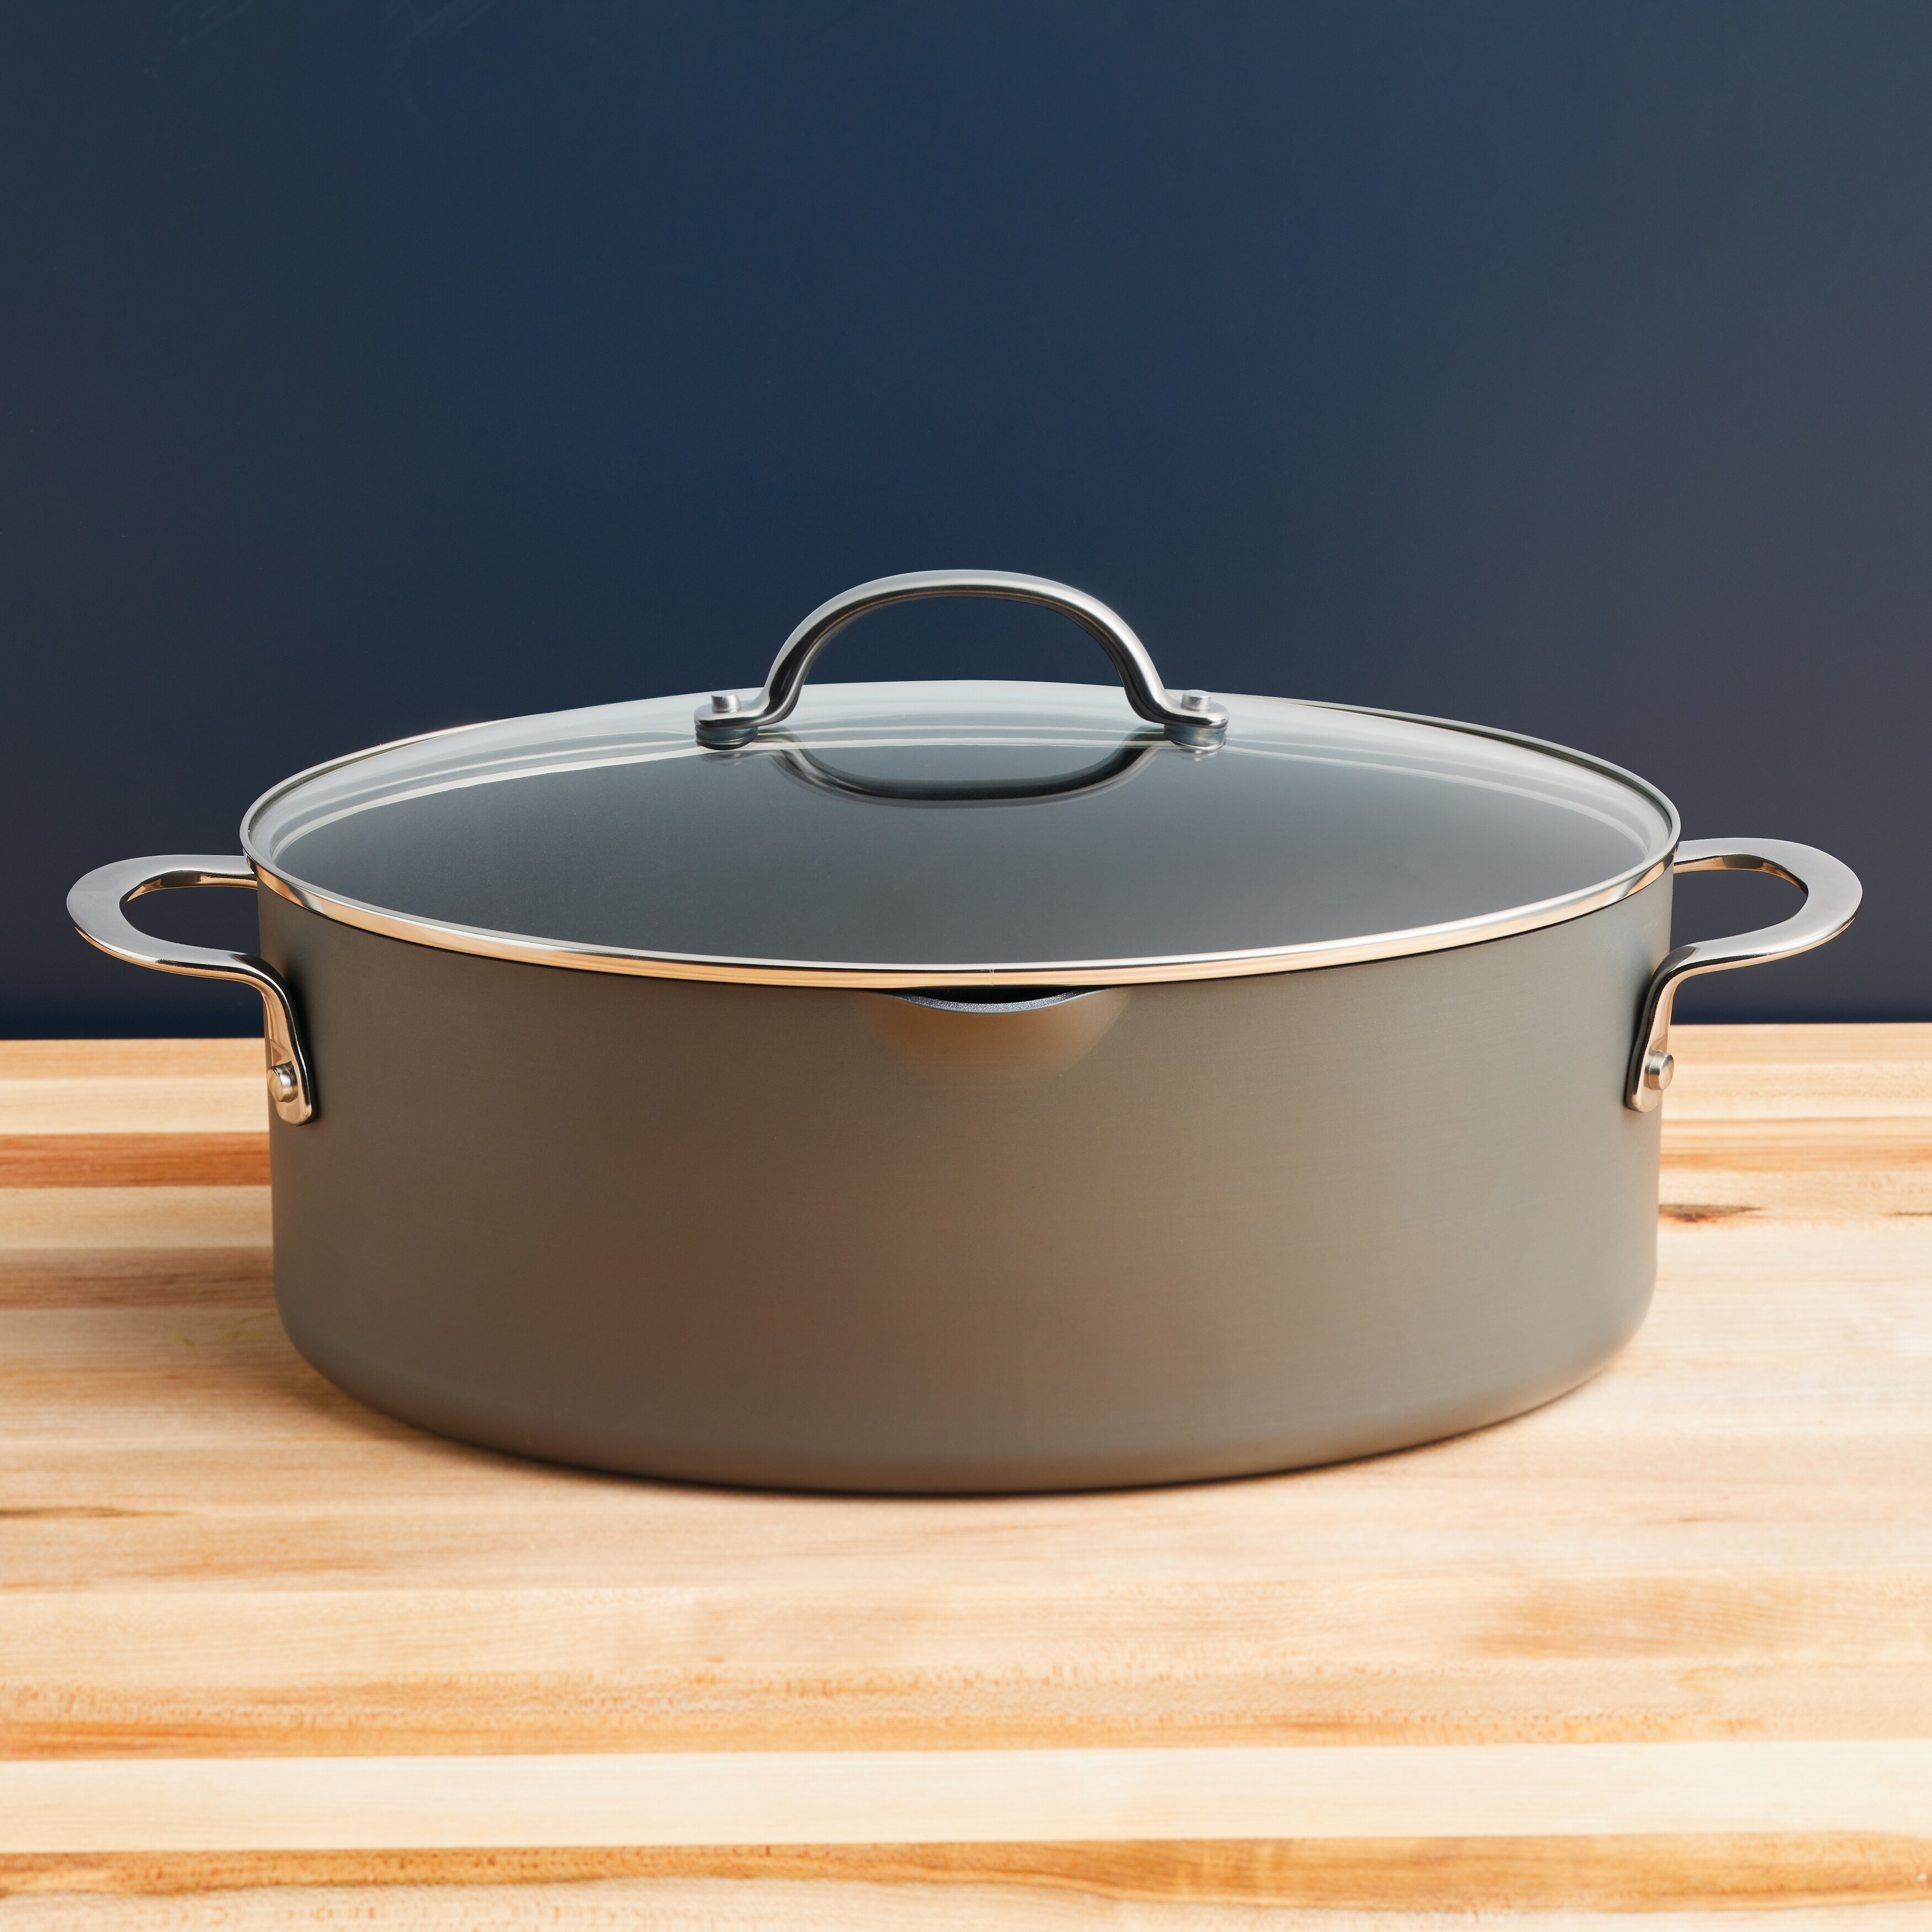 https://ak1.ostkcdn.com/images/products/is/images/direct/bdb1c9bb57df583ae1bfe89bbb016b8bf6200fee/Rachael-Ray-Hard-Anodized-Nonstick-Cookware-Oval-Pasta-Stockpot-and-Braiser%2C-8-Quart%2C-Gray.jpg